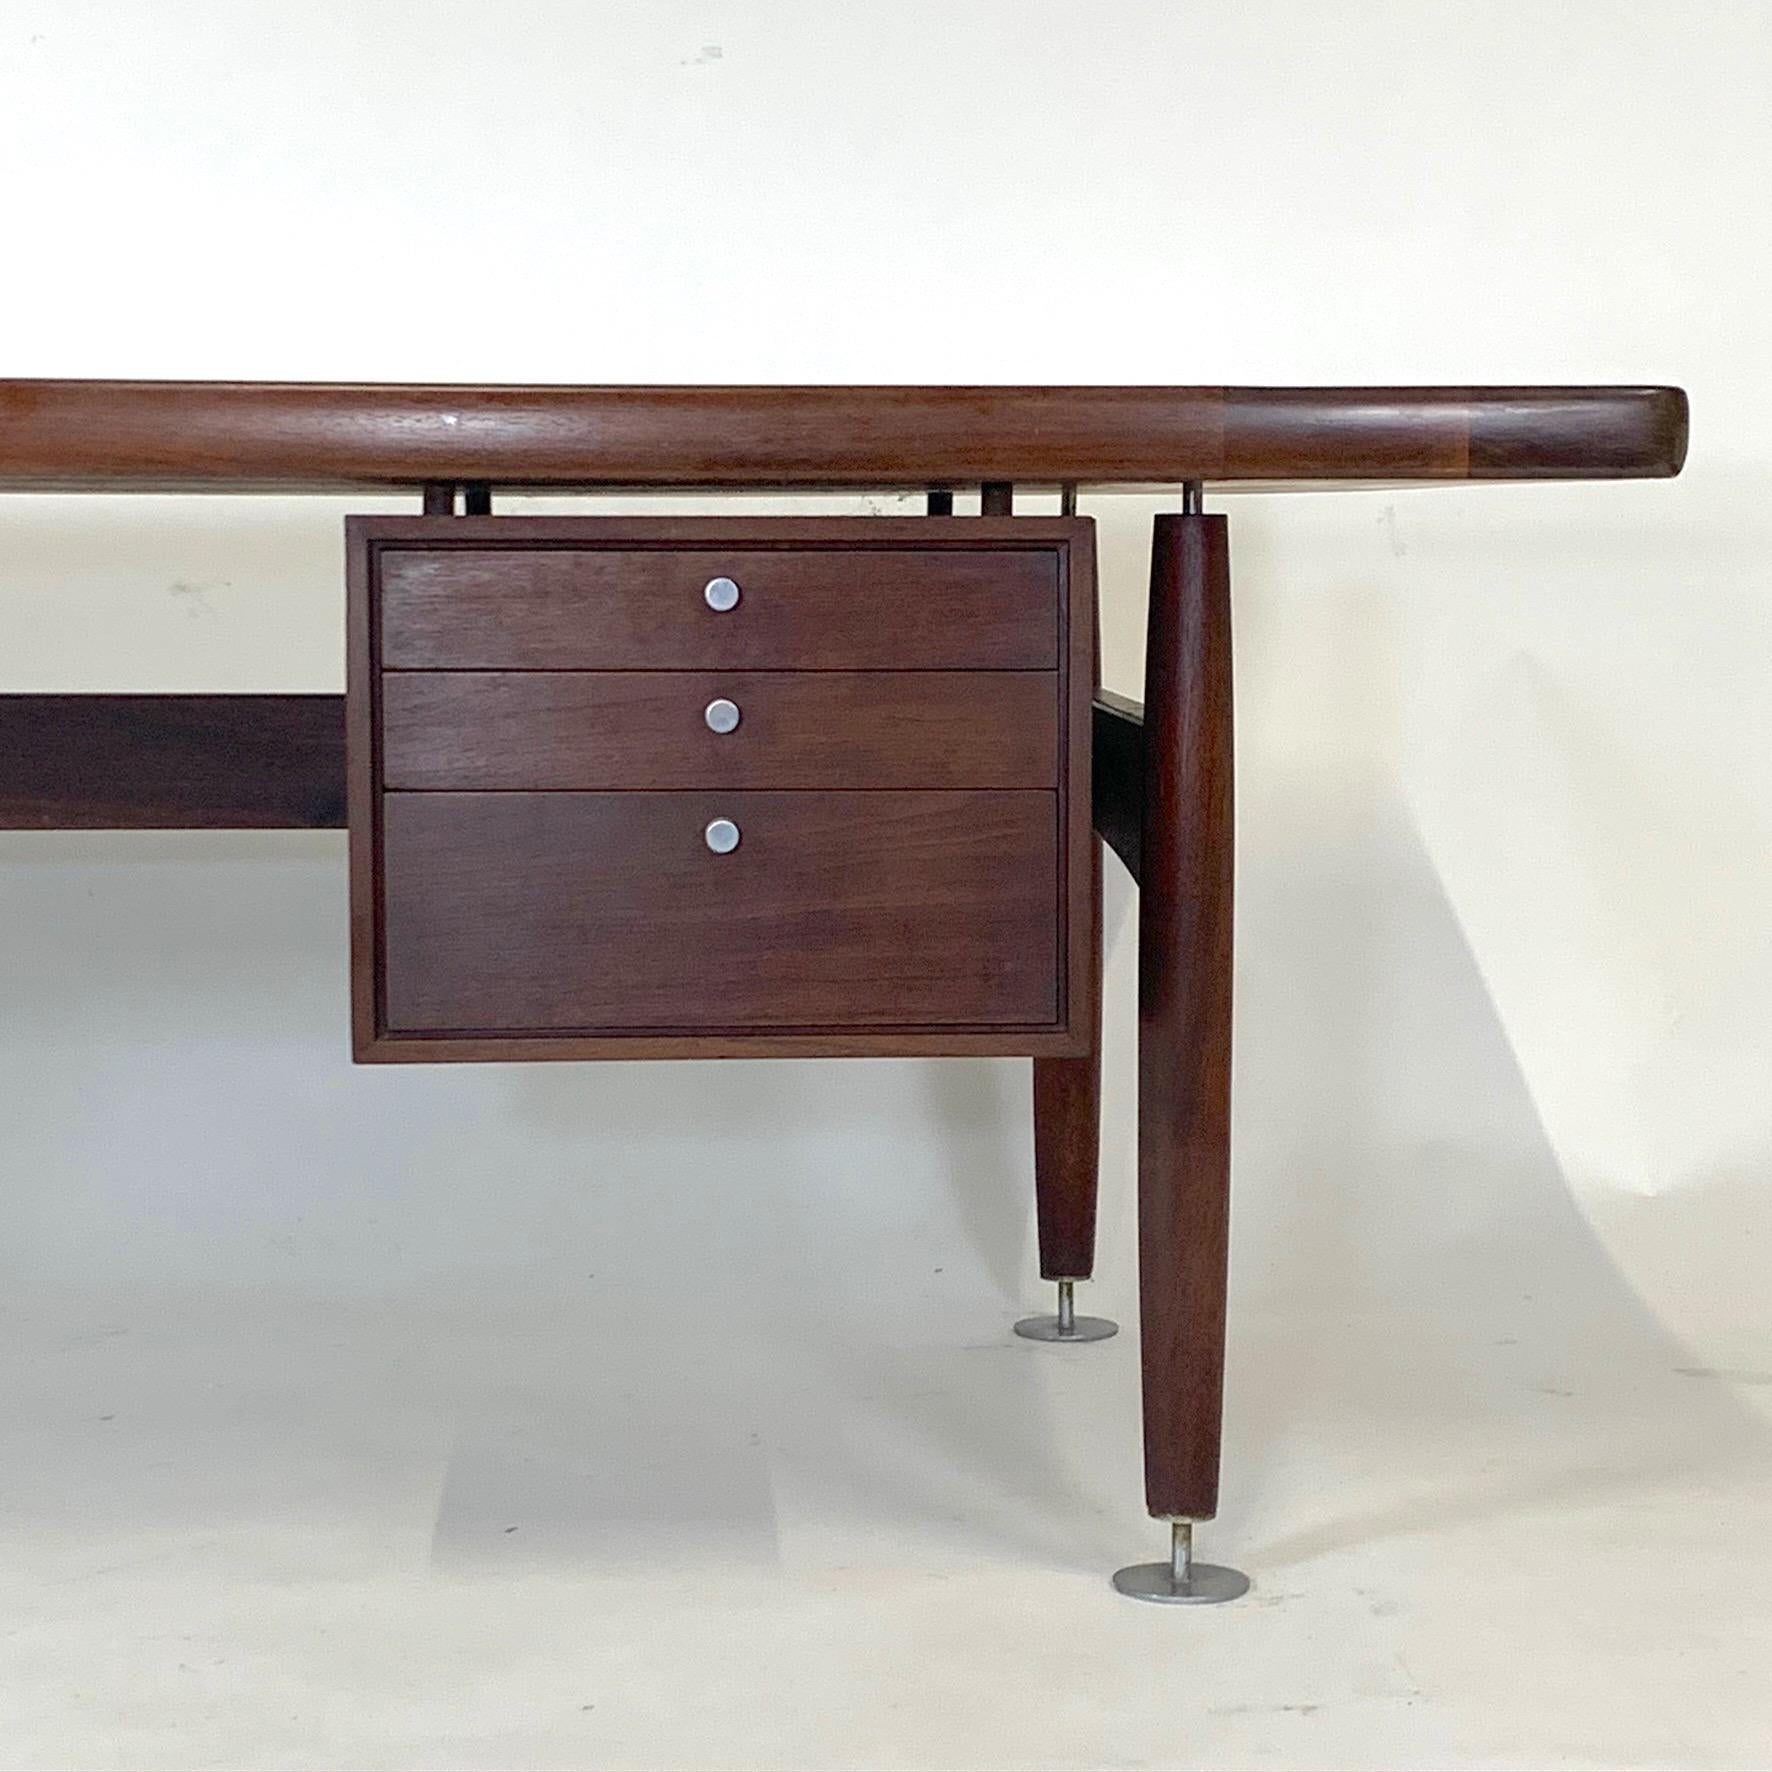 A sleek leather topped walnut desk with a bank of drawers and machined pulls and oversized decorative glides by Lehigh Furniture attributed to Ward Bennett. Very impressive desk with some wear and patina to the leather but shows very well. Wood is